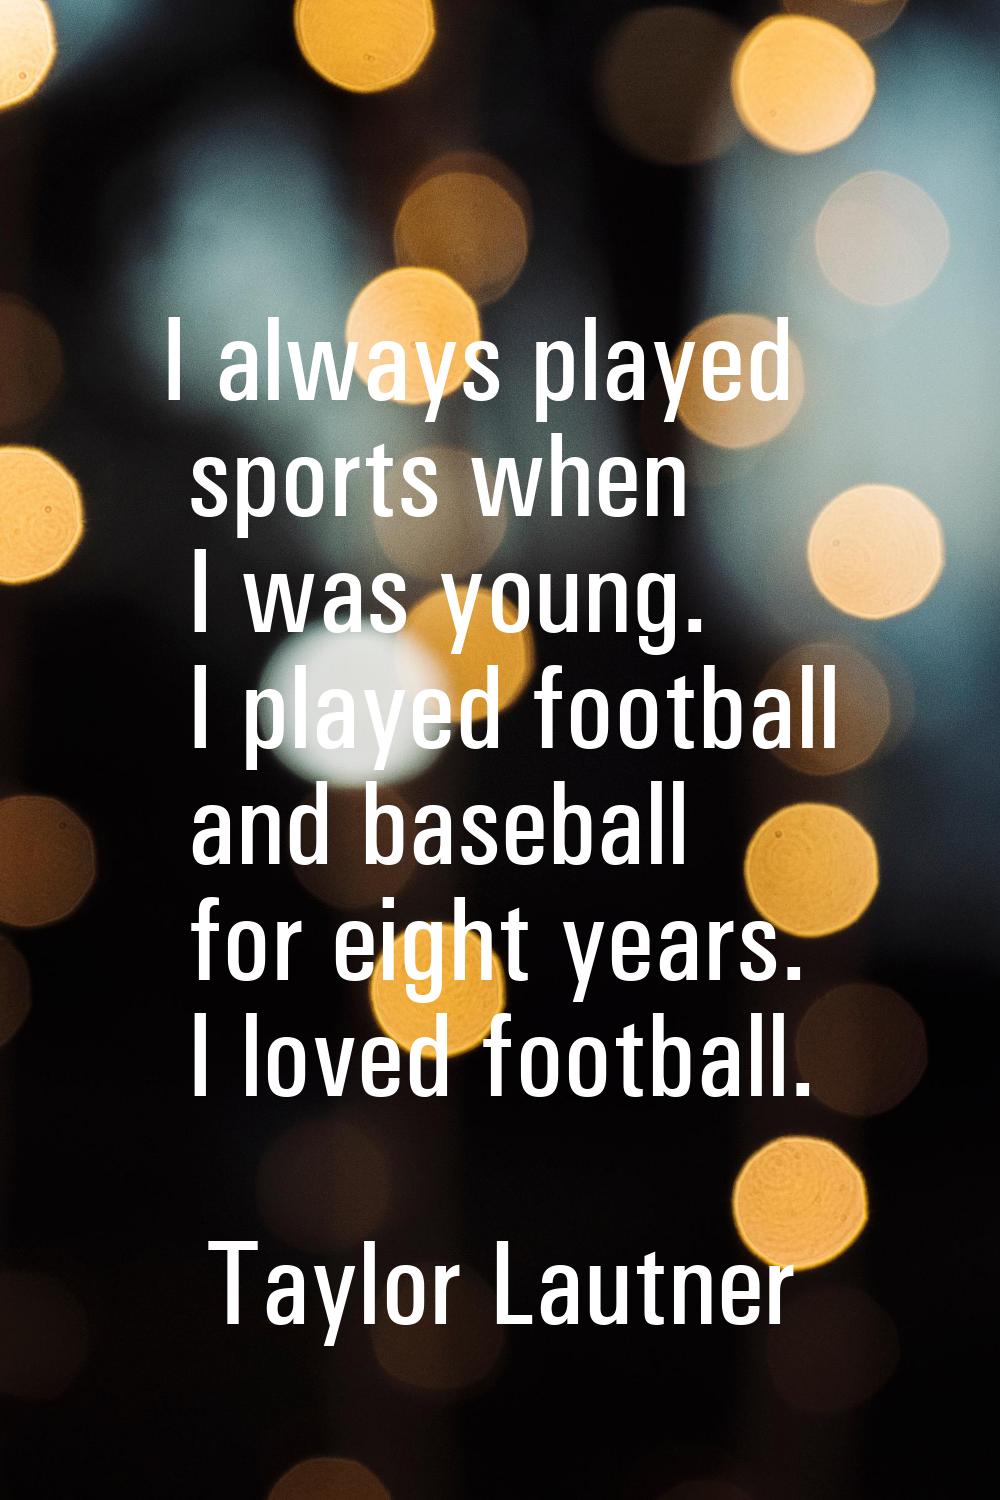 I always played sports when I was young. I played football and baseball for eight years. I loved fo